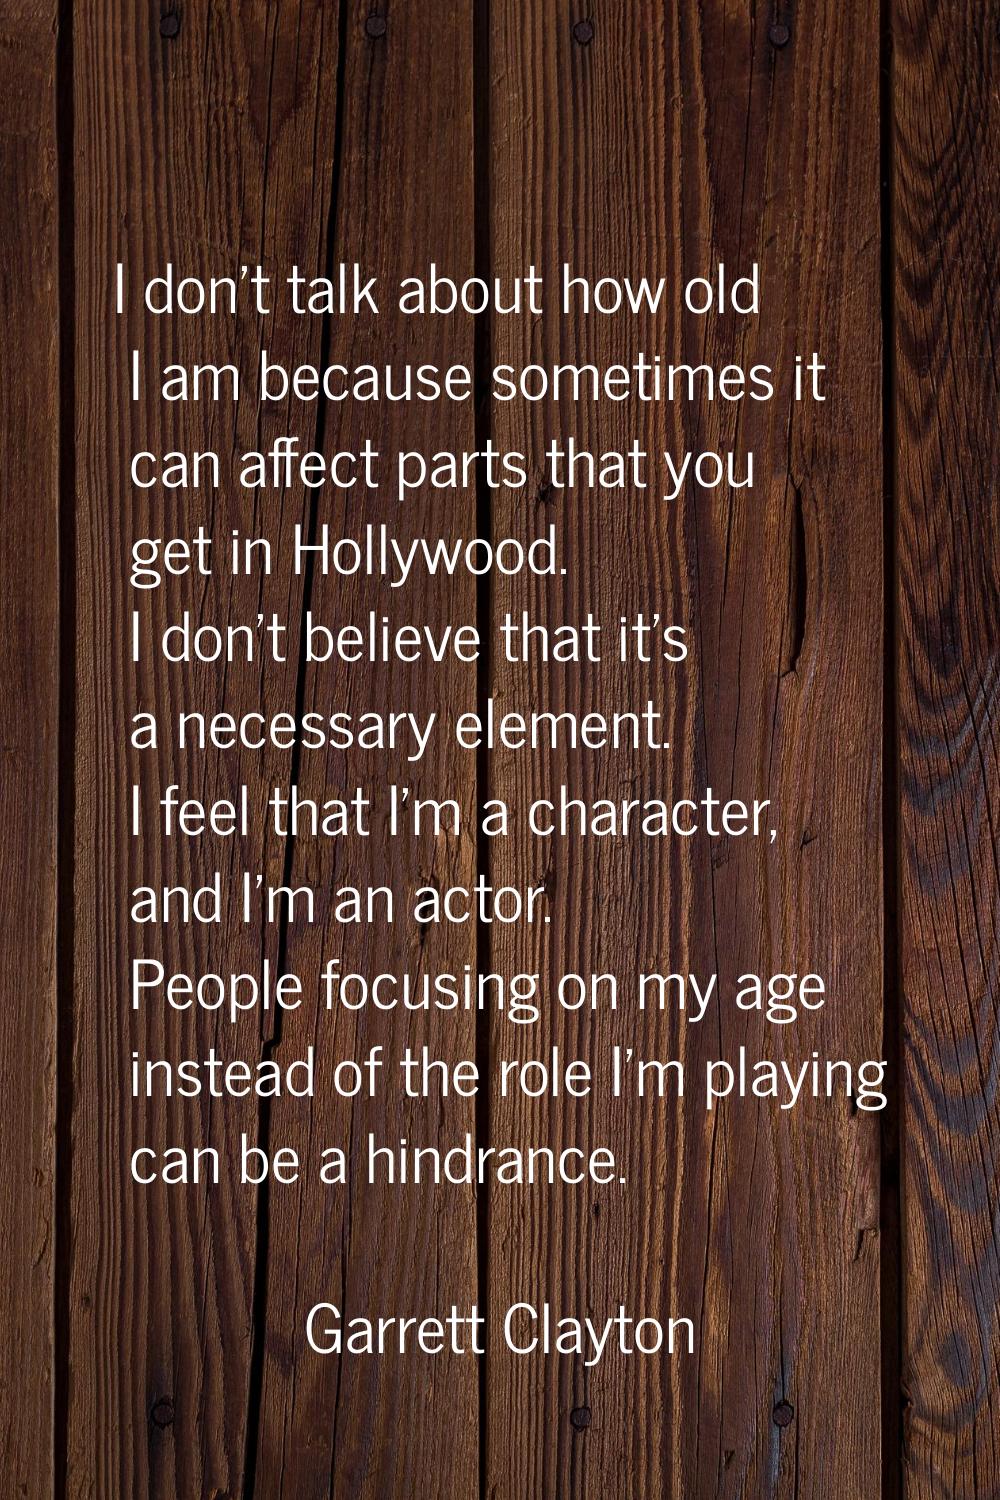 I don't talk about how old I am because sometimes it can affect parts that you get in Hollywood. I 